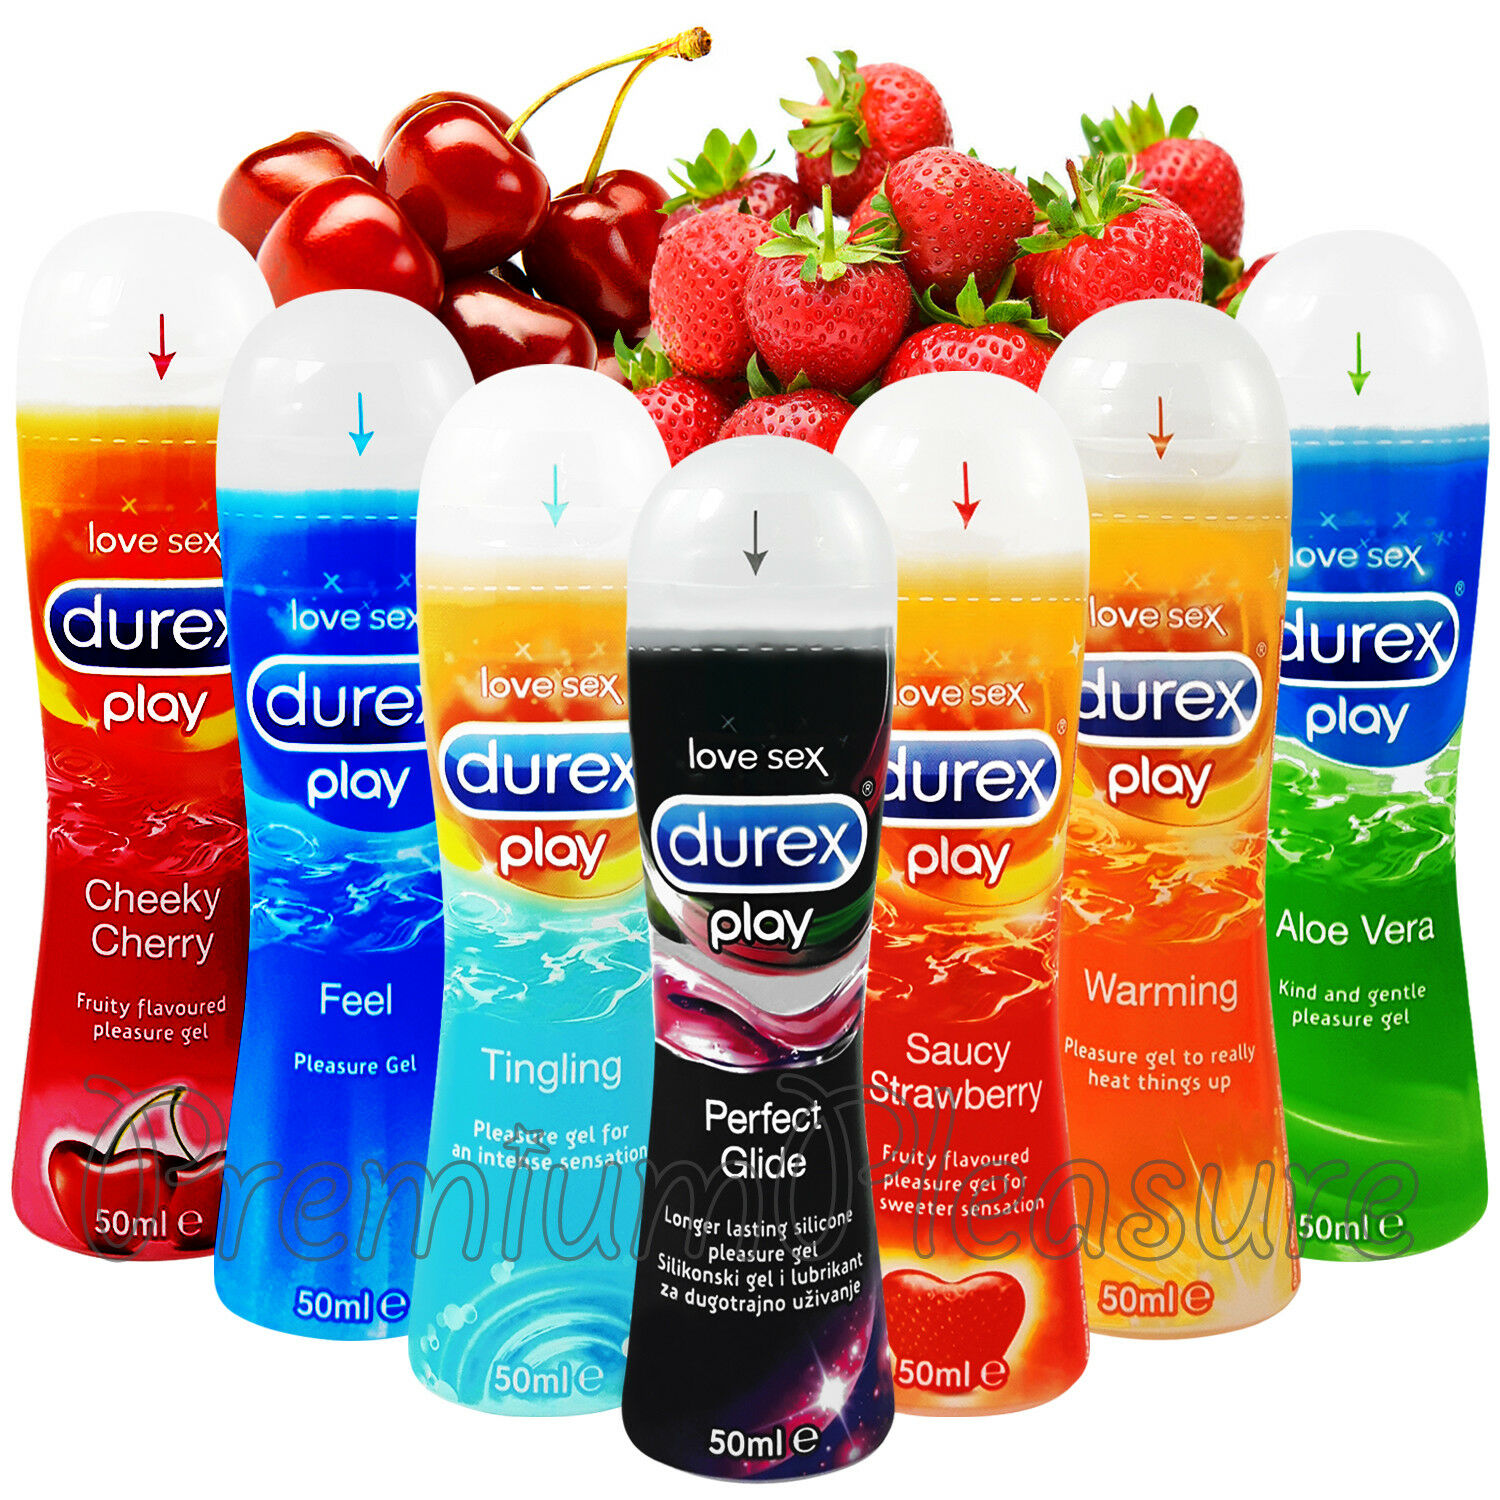 Durex Play Lubricant - Lube & Gel - Perfect Glide Real Feel Tingle Fruits * New